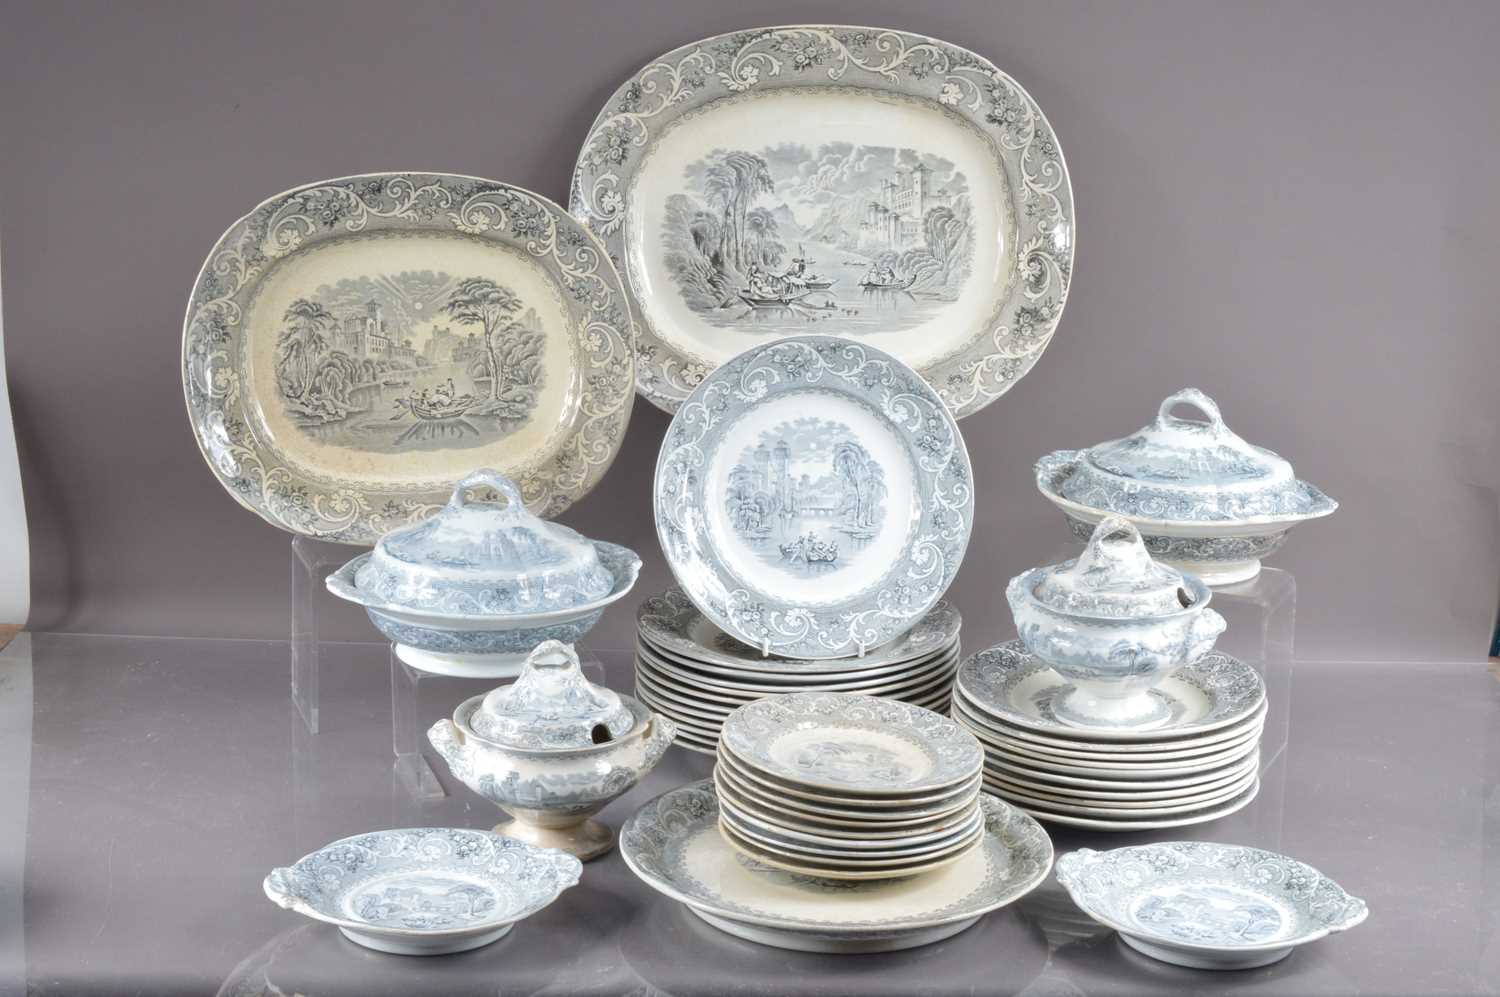 A 19th Century Antique Victorian Staffordshire transfer ware earthenware pottery dinner service in